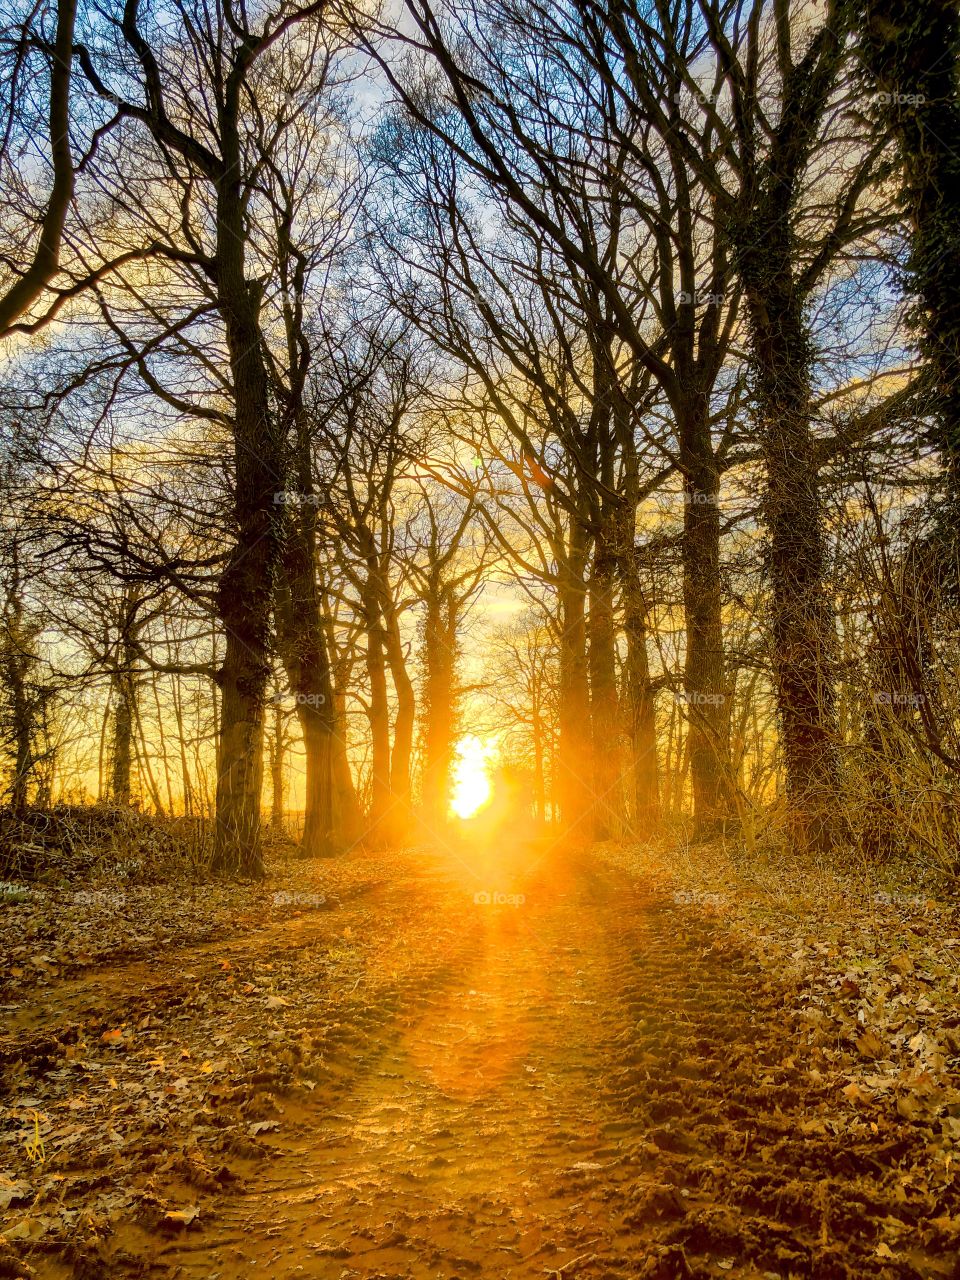 Golden sunset or sunrise over a sandy dirtroad I between the forest with bare trees in wintertime 